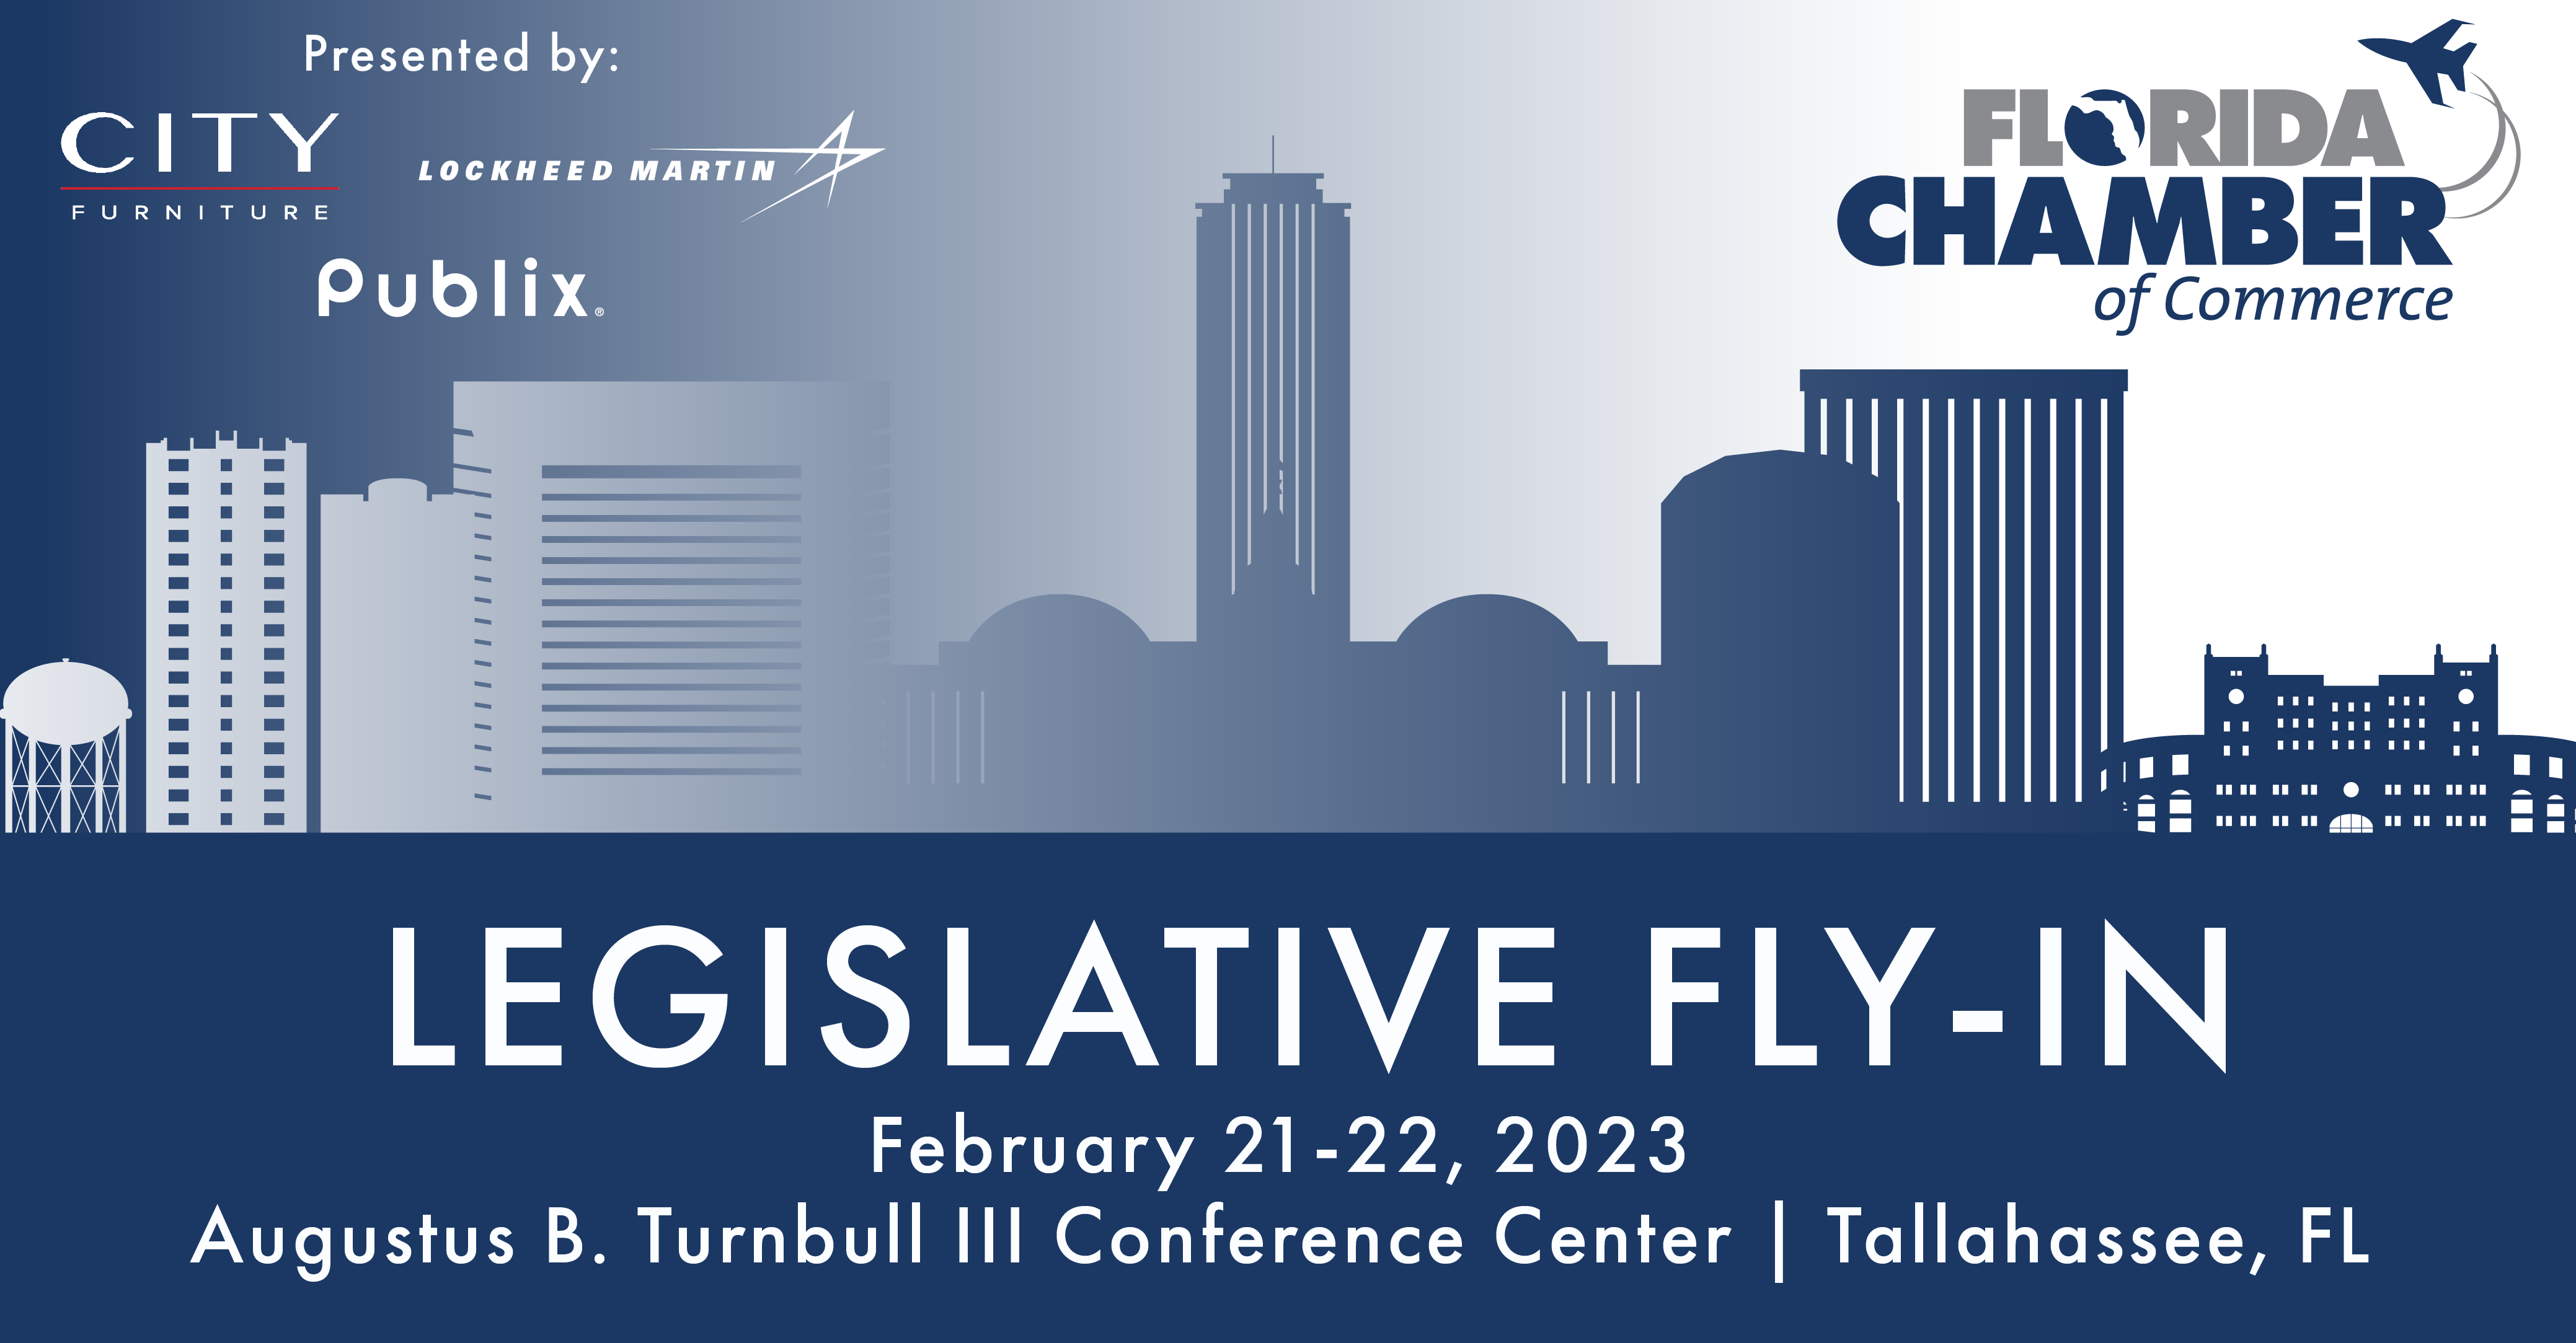 2023 Legislative Fly In Event Landing Page Graphic 